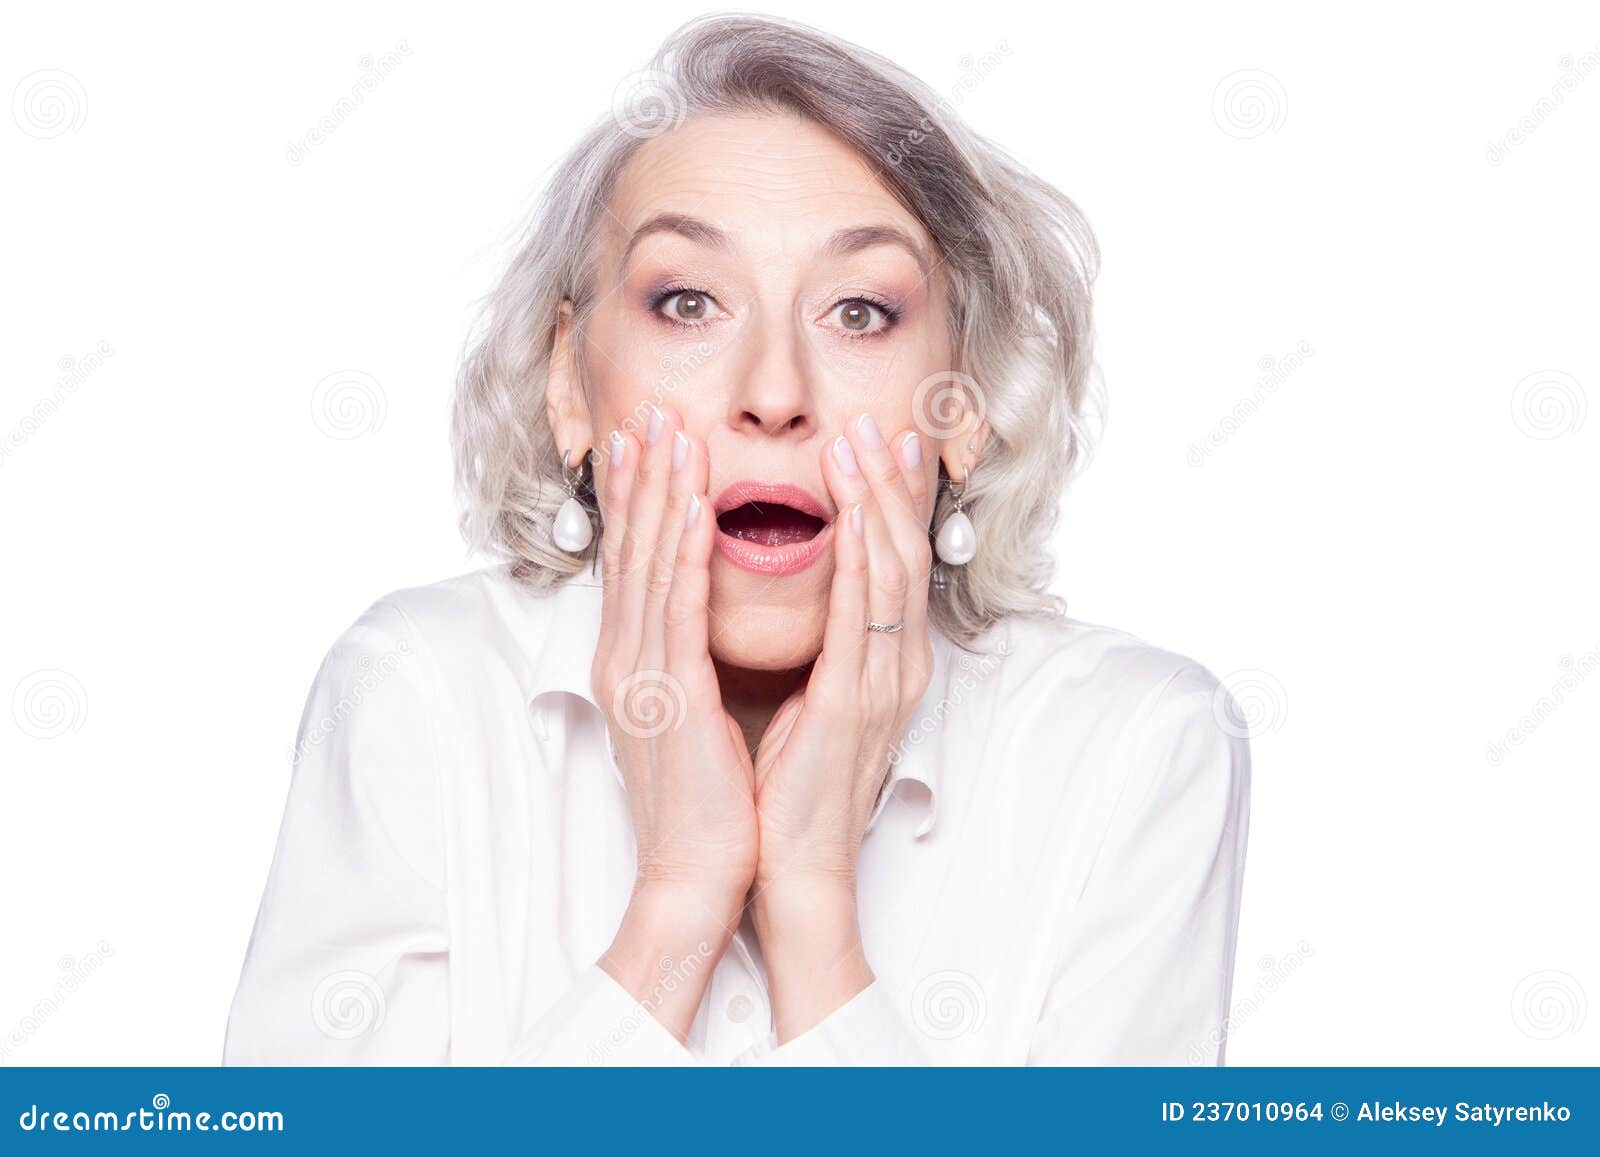 Portrait Of A Modern Mature Woman Looking At Camera With Open Mouth And Hands At Her Face Scared